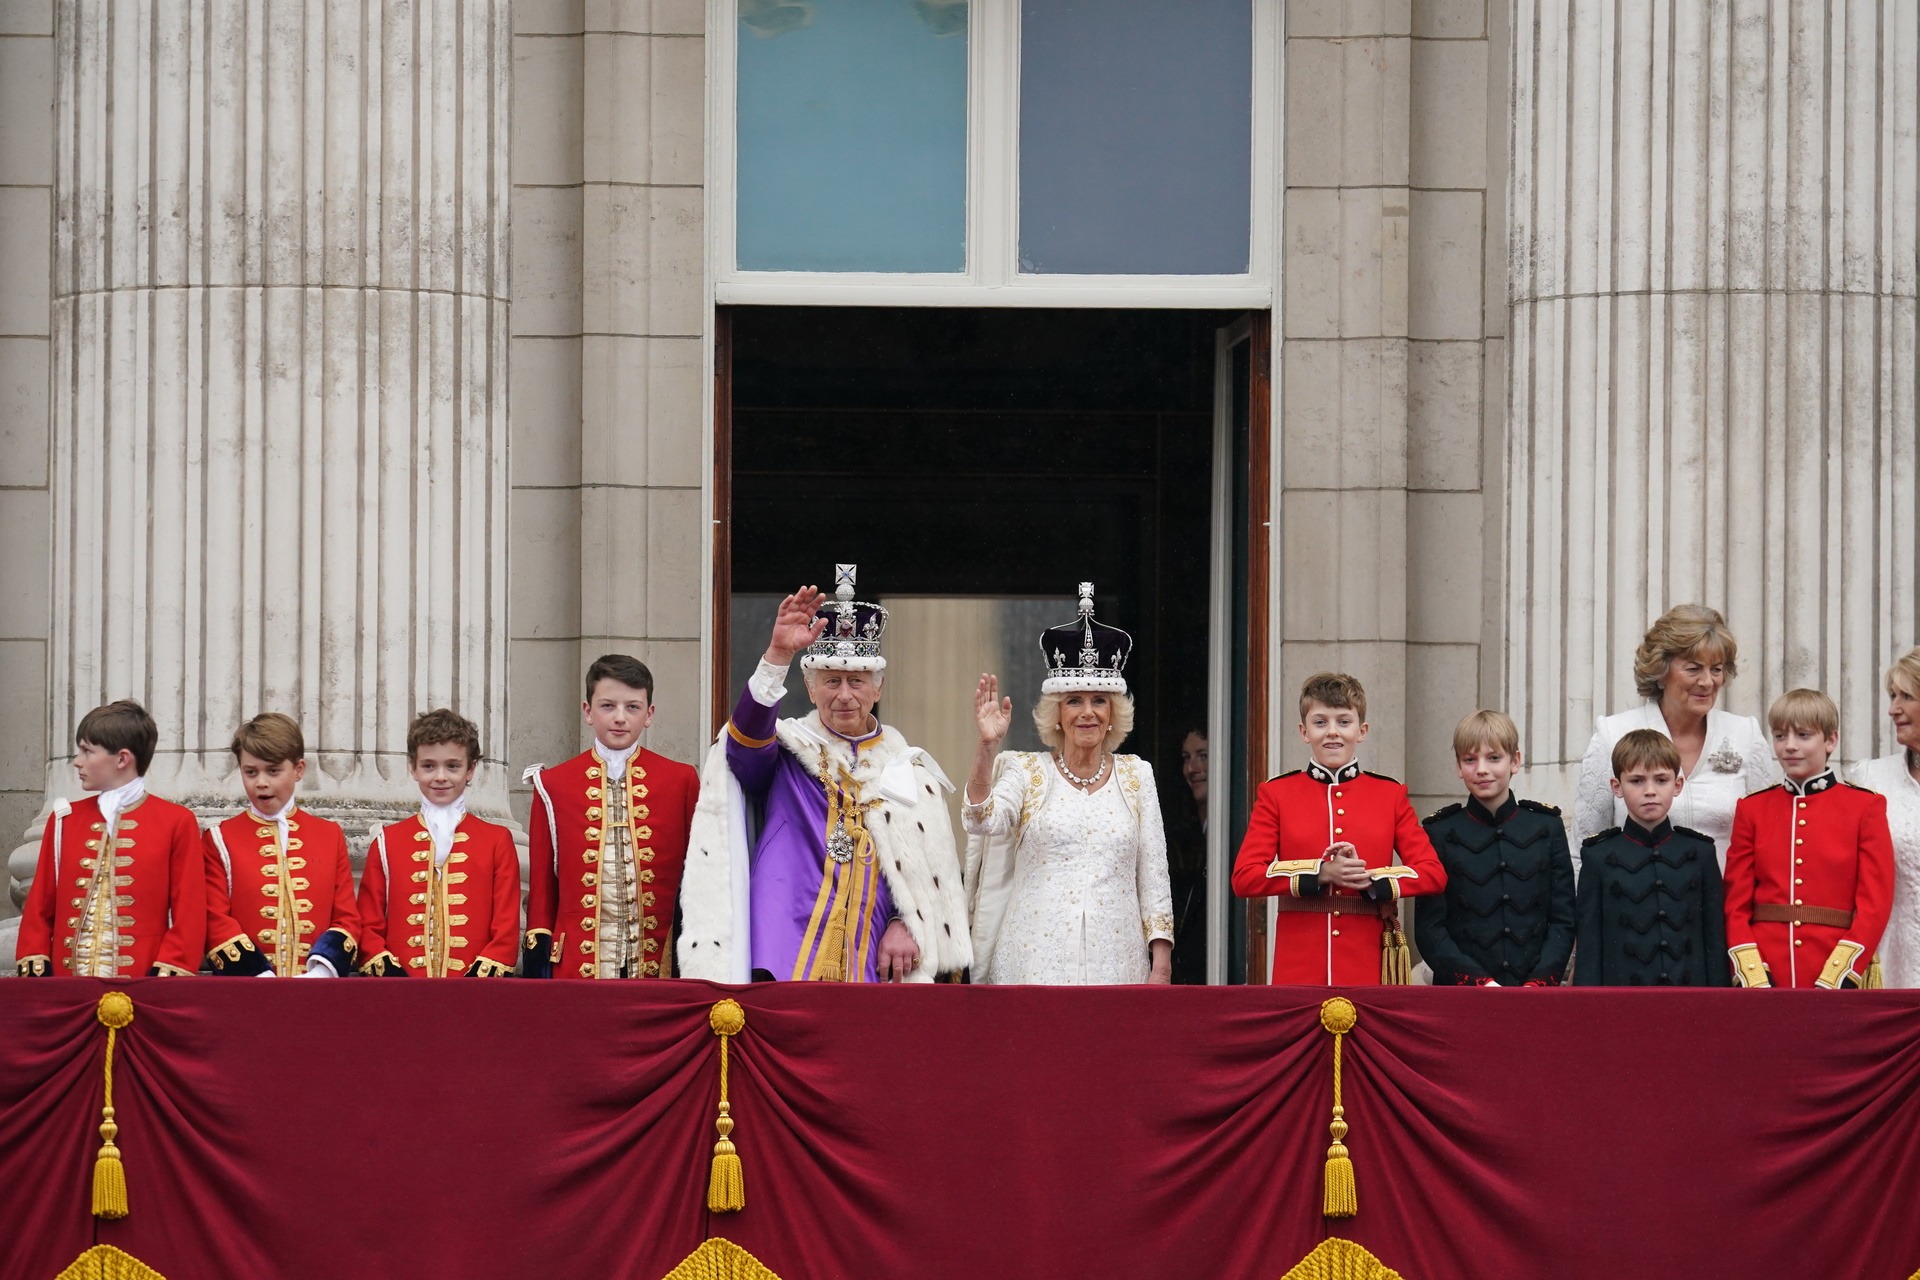 King Charles III and Queen Camilla on the balcony of Buckingham Palace following the coronation.